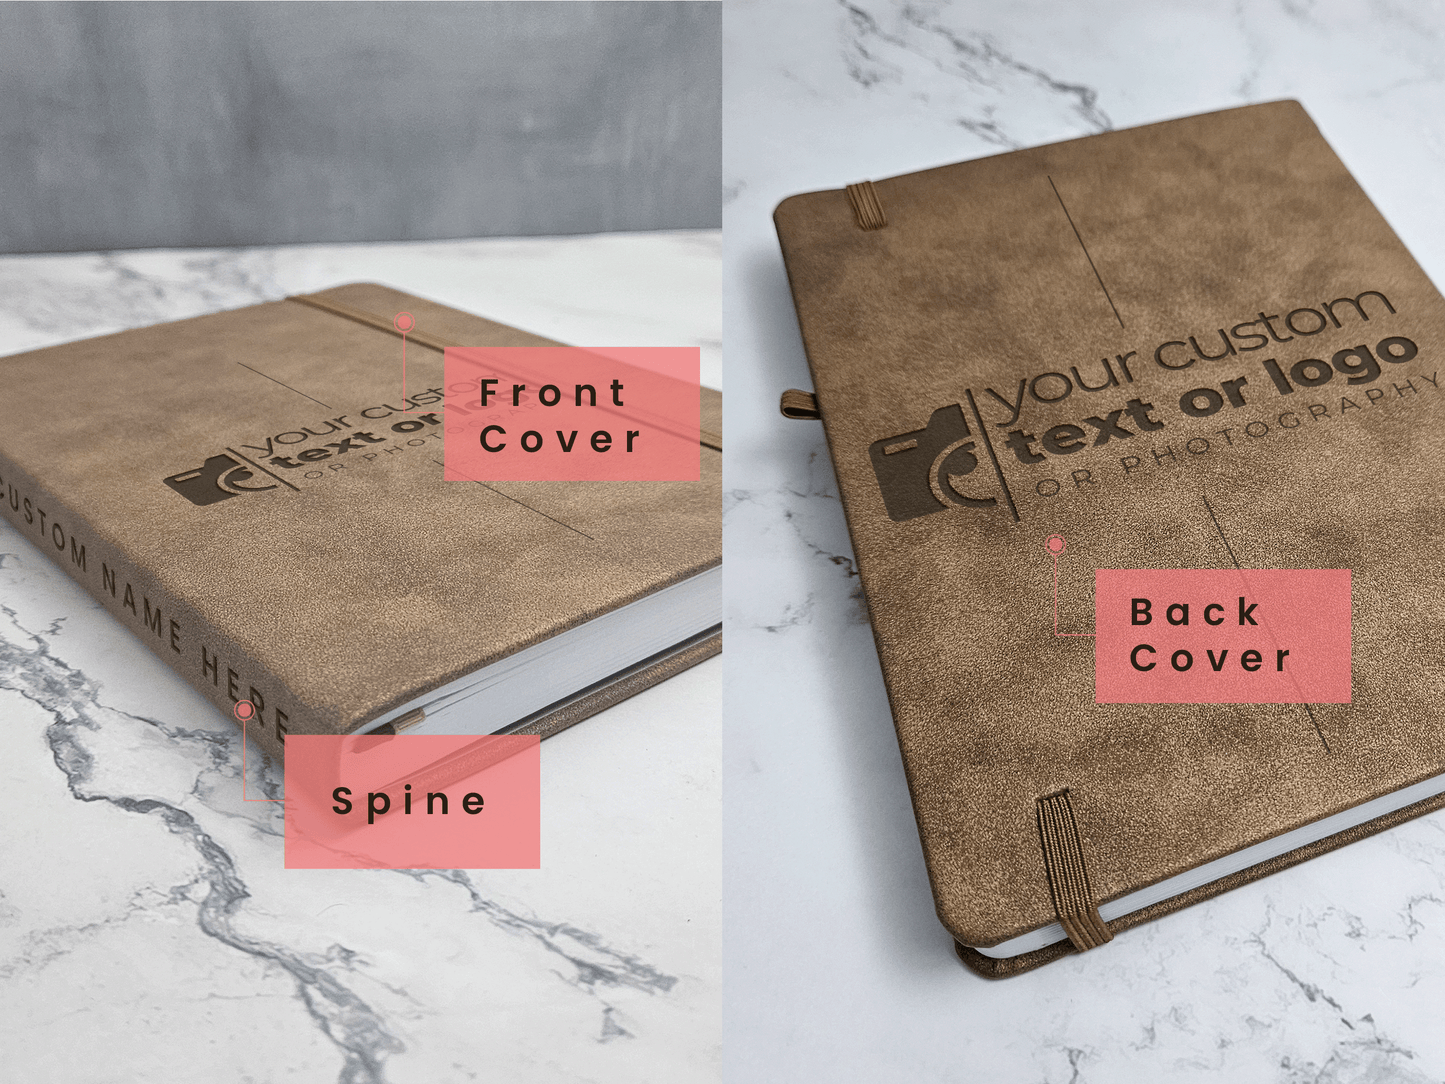 Customized Journal with Personalized Touch - Add Your Name, Logo, or Photo for a Unique Notebook